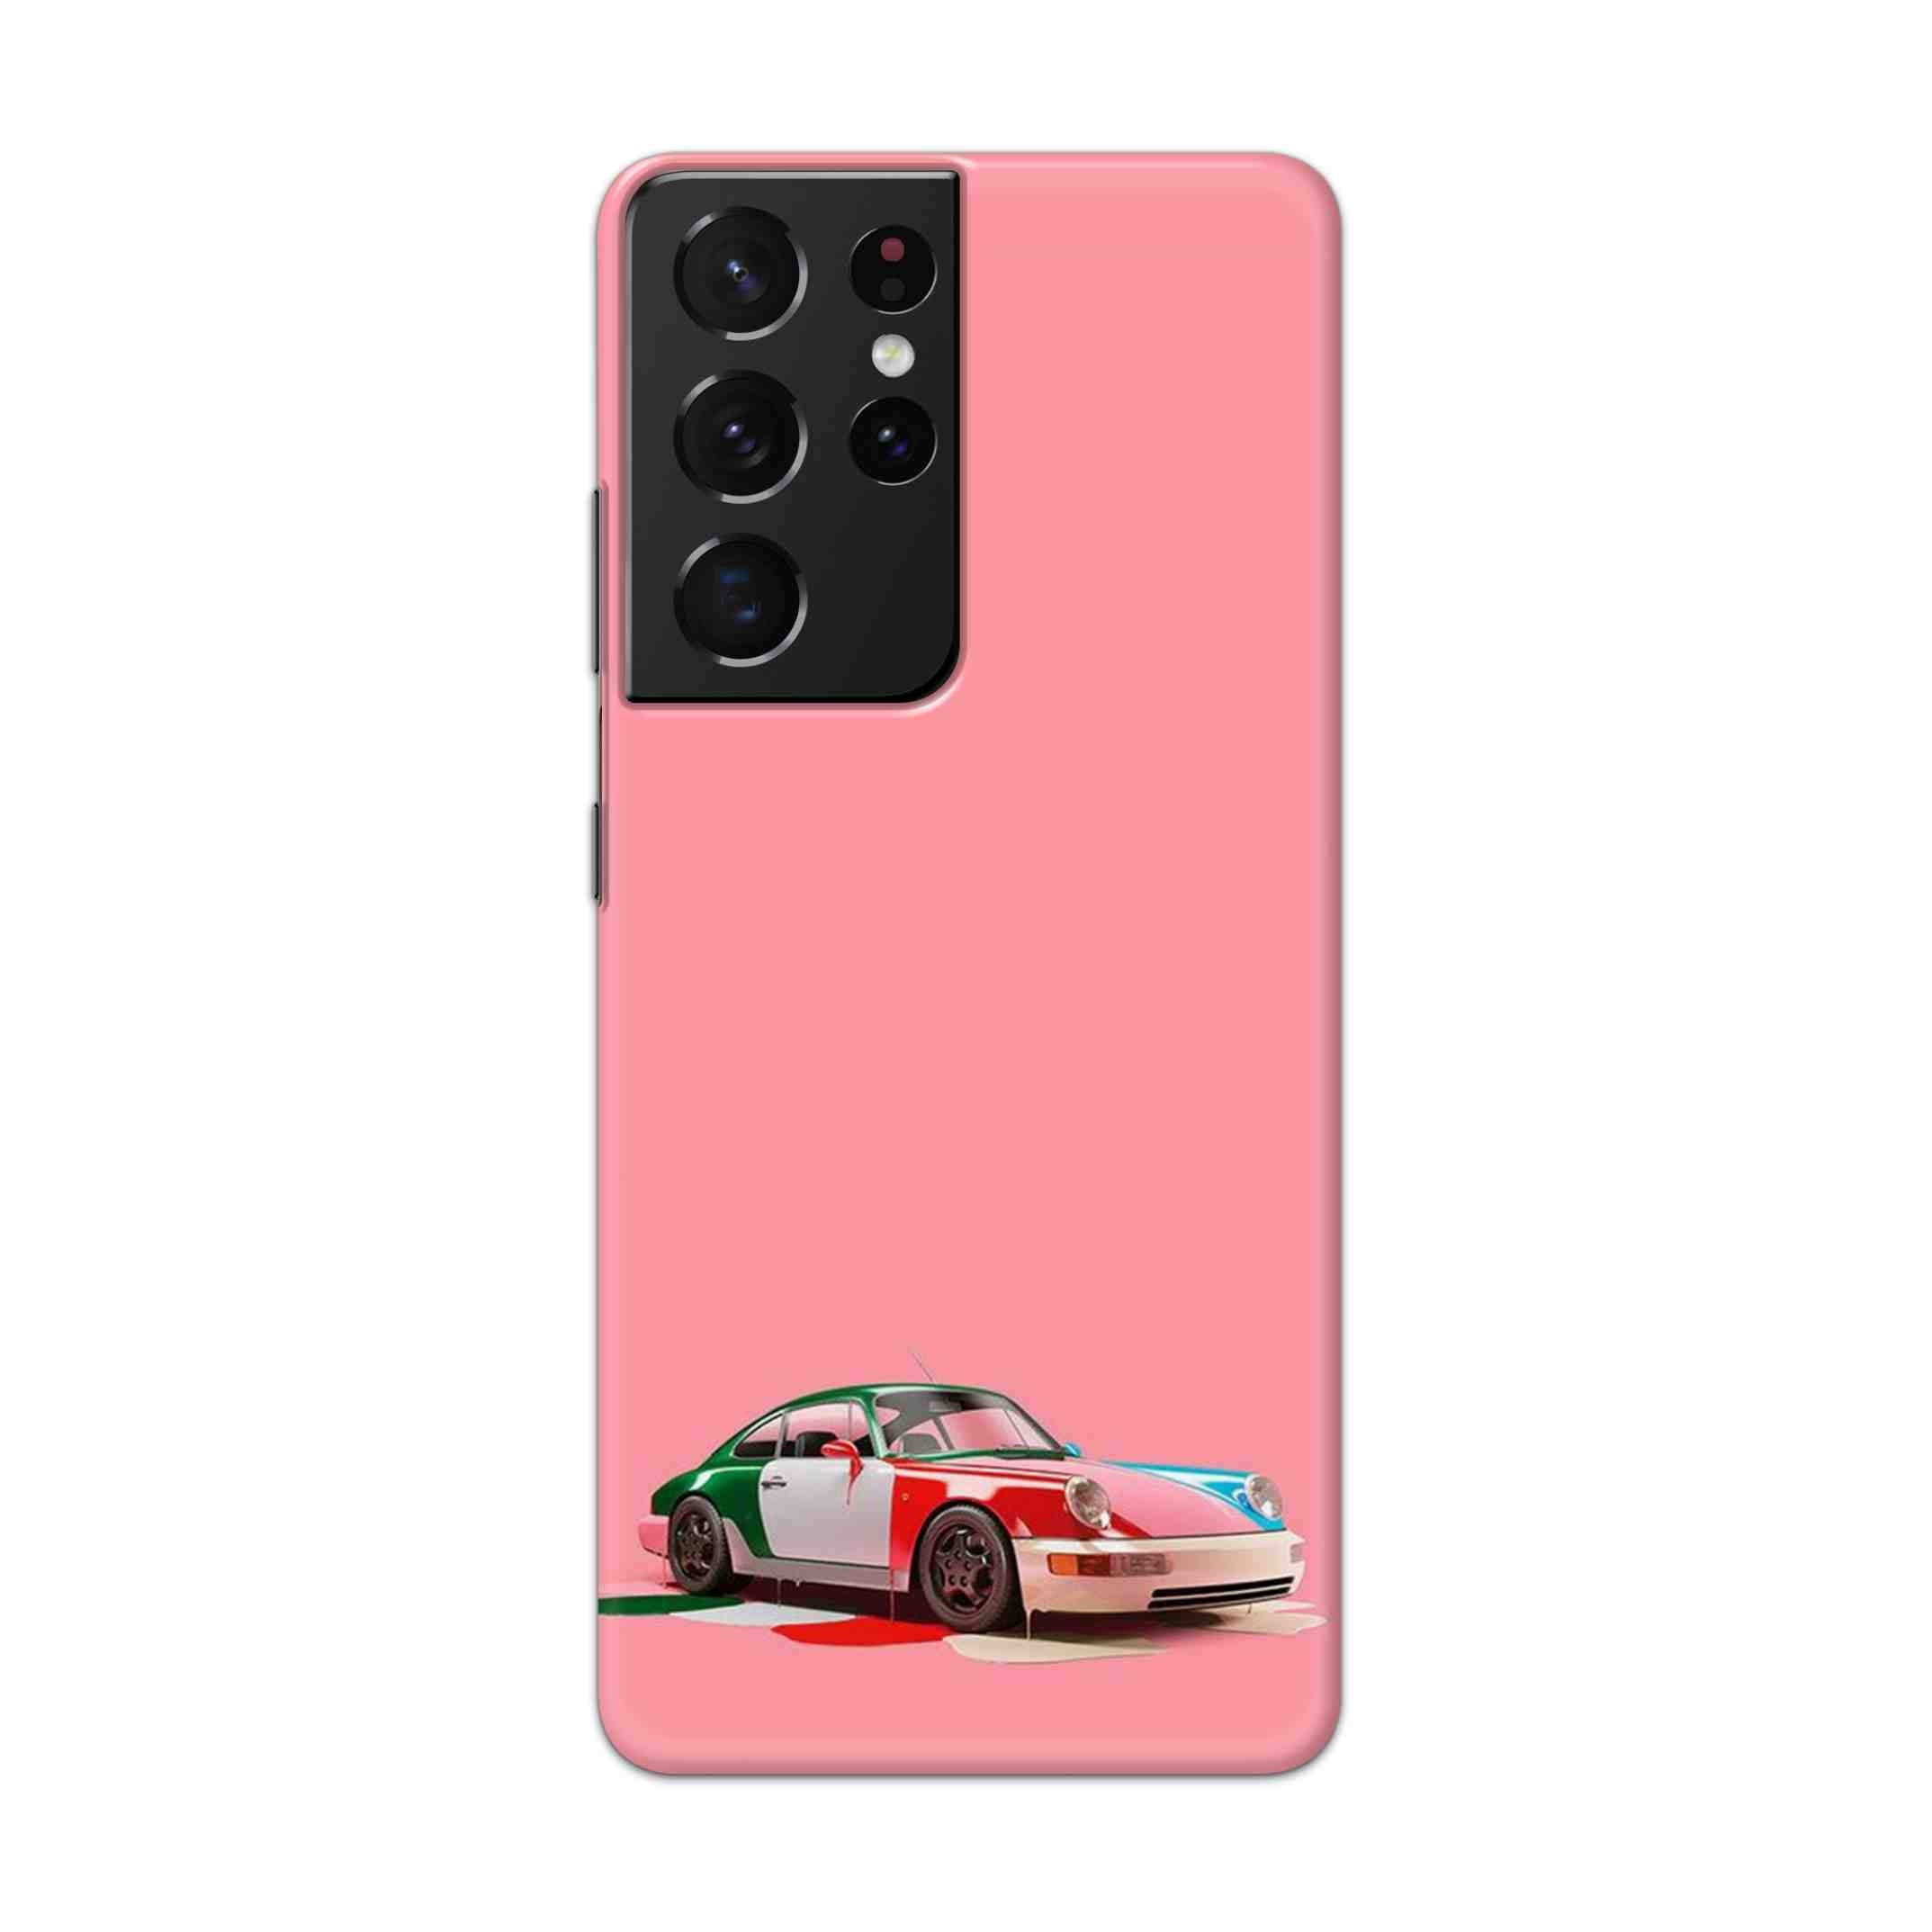 Buy Pink Porche Hard Back Mobile Phone Case Cover For Samsung Galaxy S21 Ultra Online